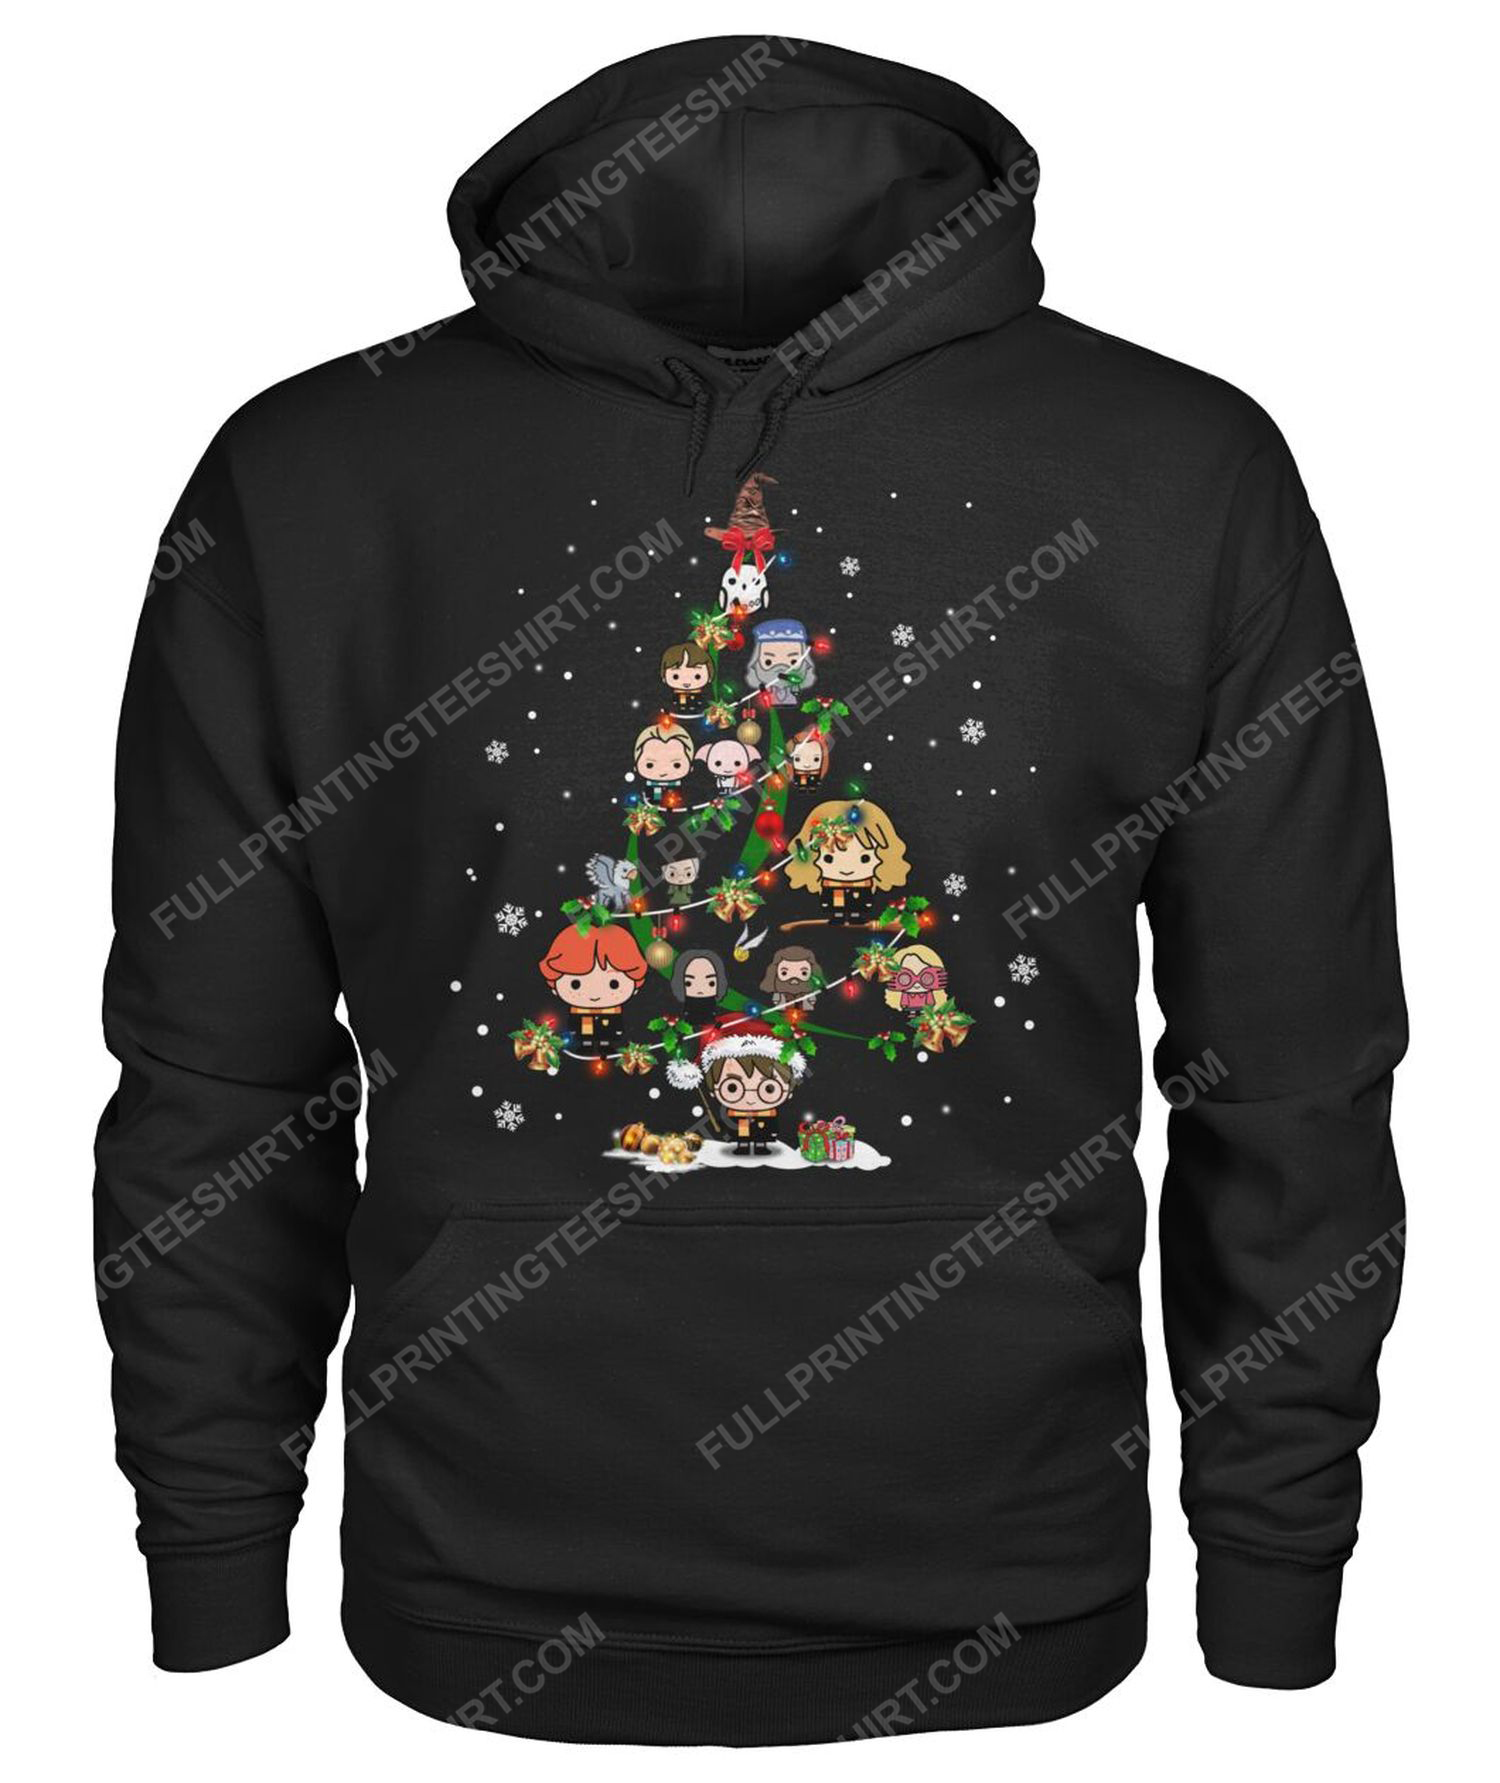 Harry potter chibi and christmas tree hoodie